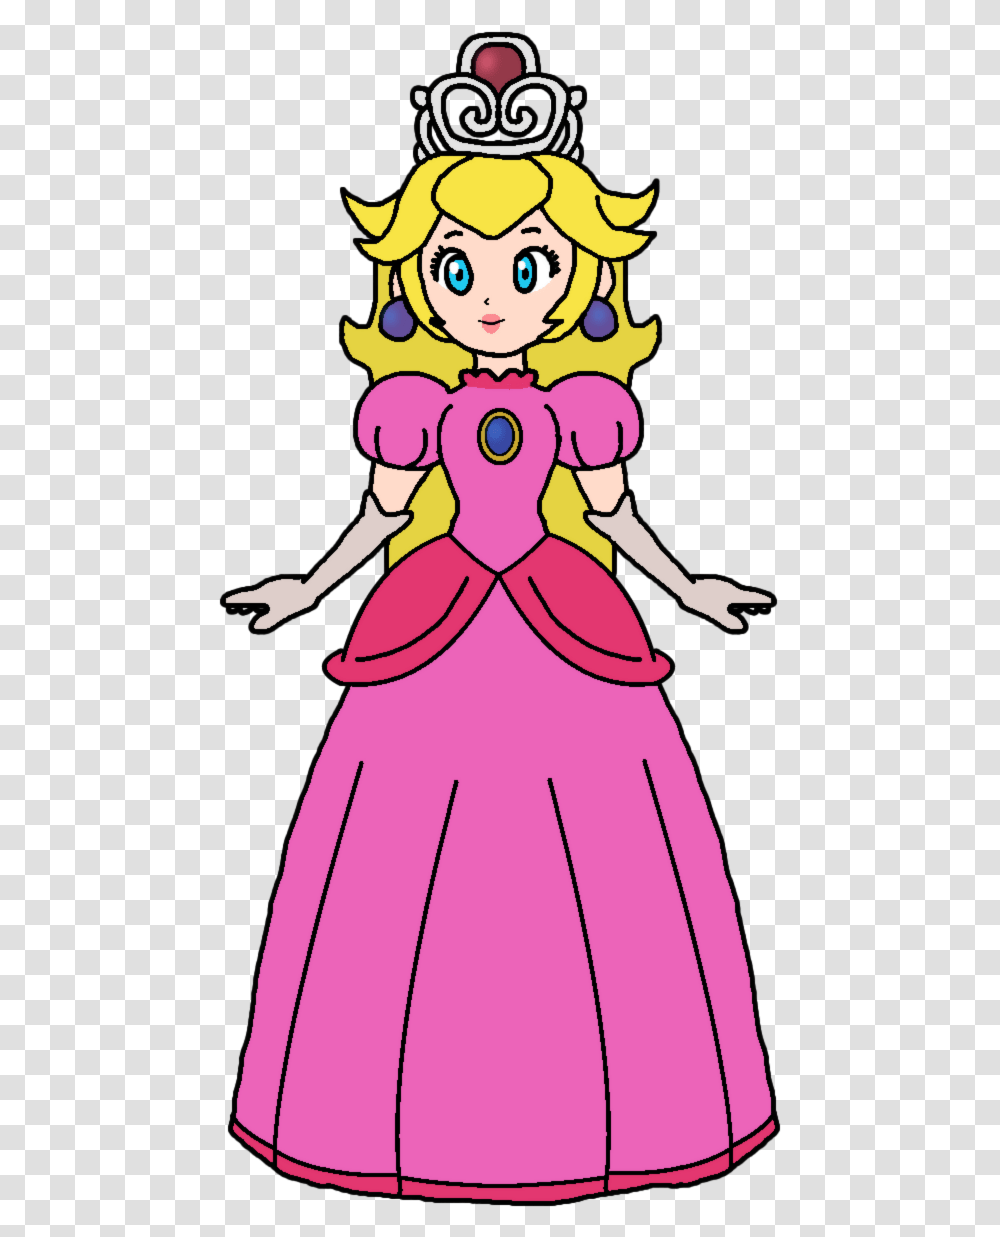 Odyssey By Katlime Peach Baby Pregnant Princess Peach, Person, Dress, Costume Transparent Png